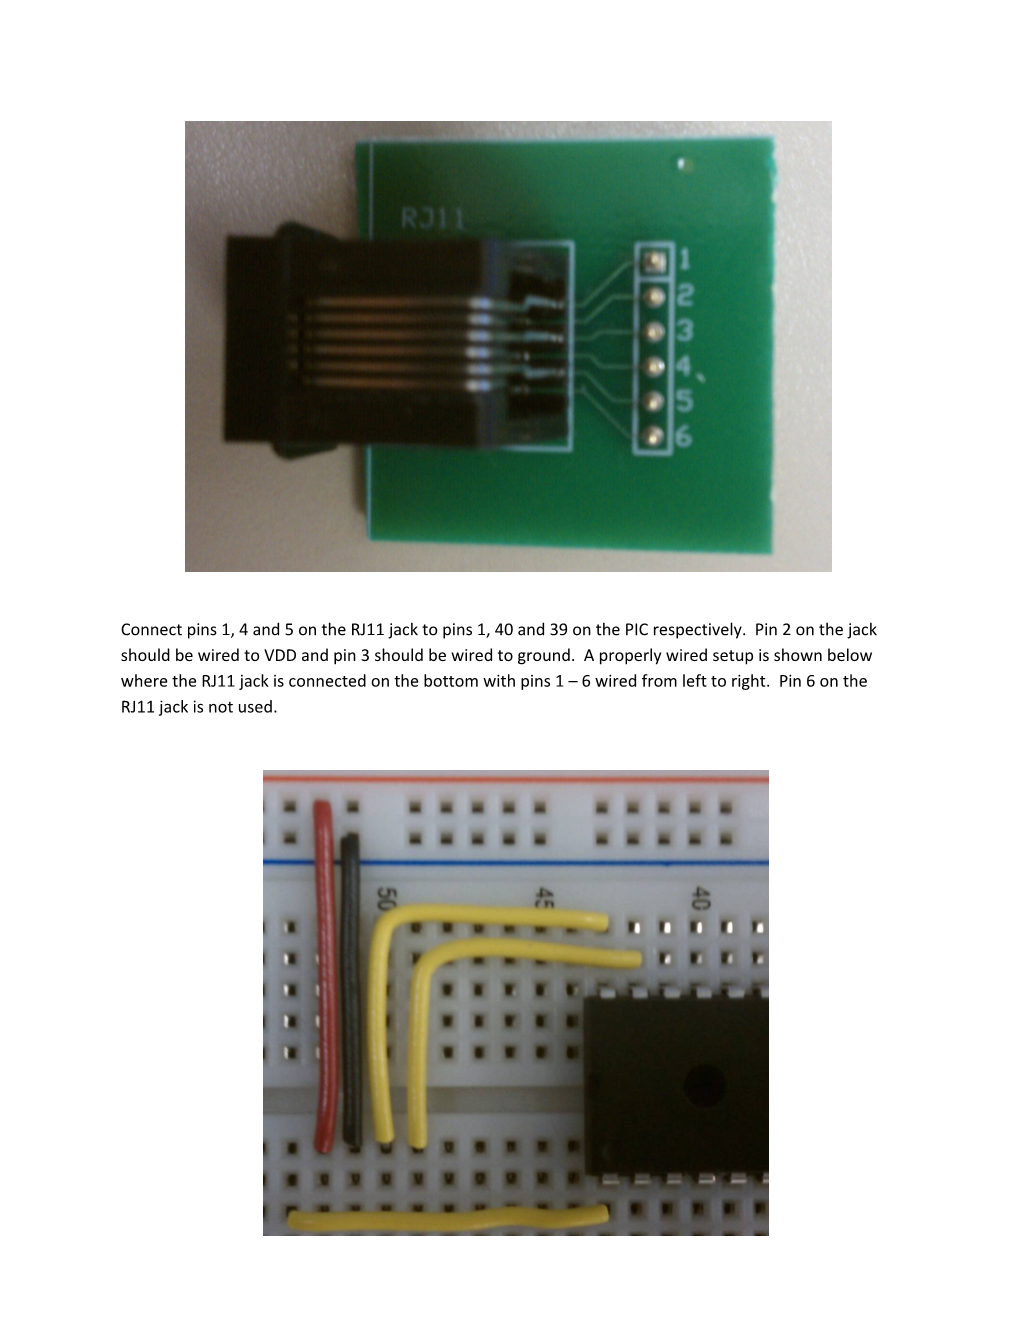 Voltage Measurement Witha PIC Microcontroller